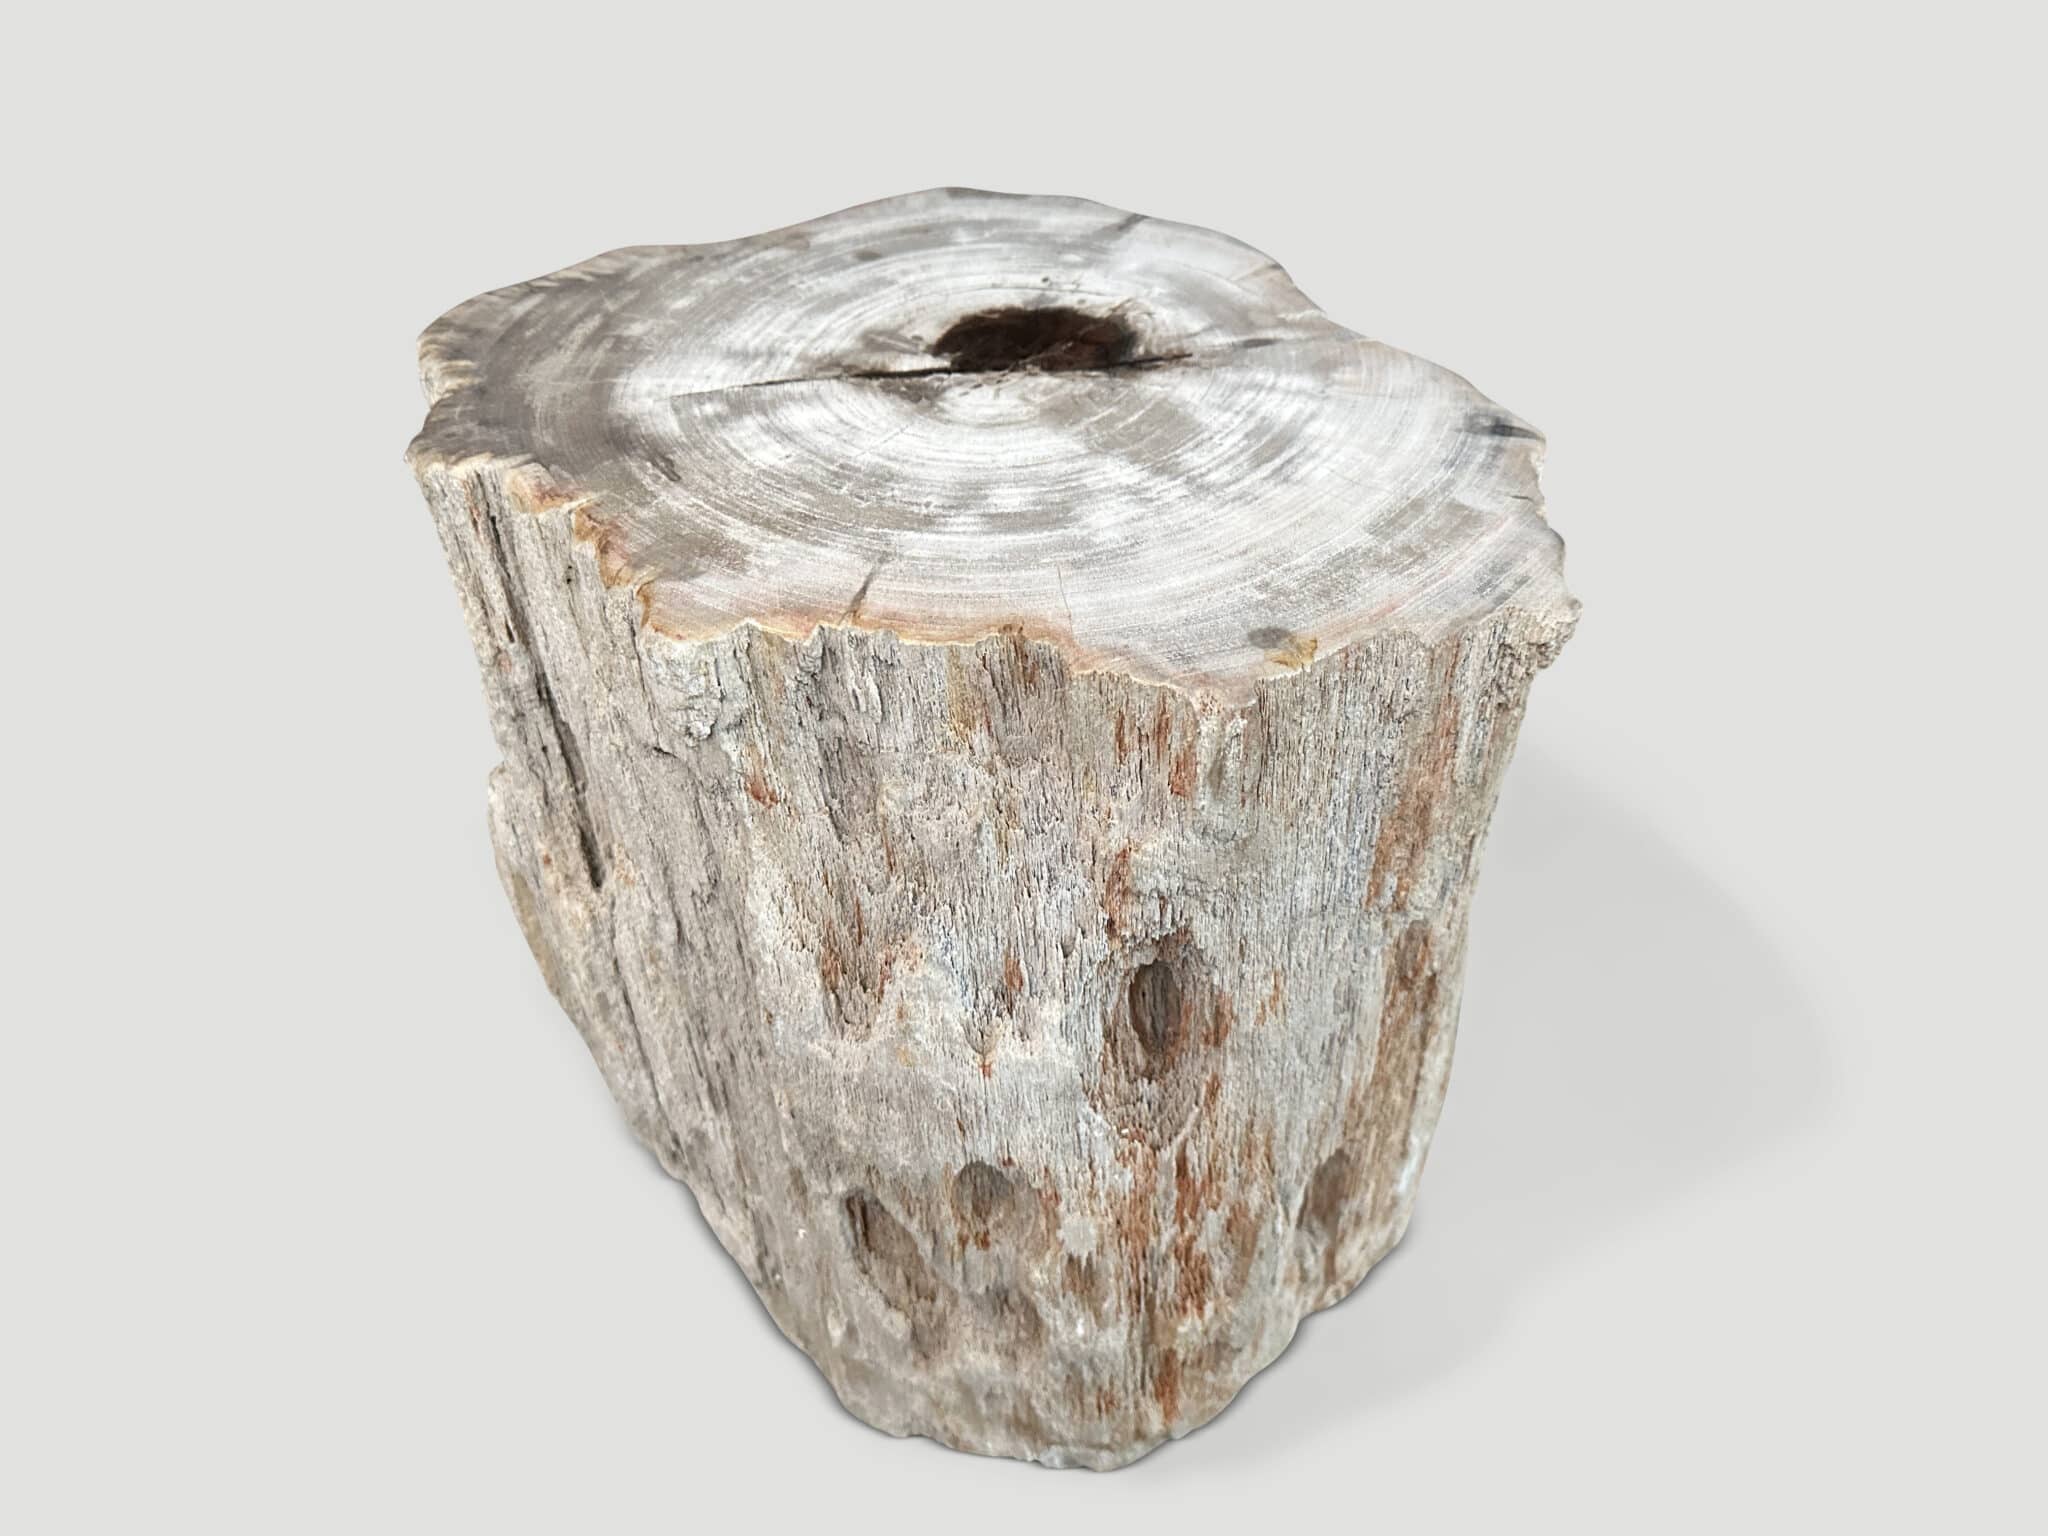 HIGH QUALITY PETRIFIED WOOD AND RESIN SIDE TABLE